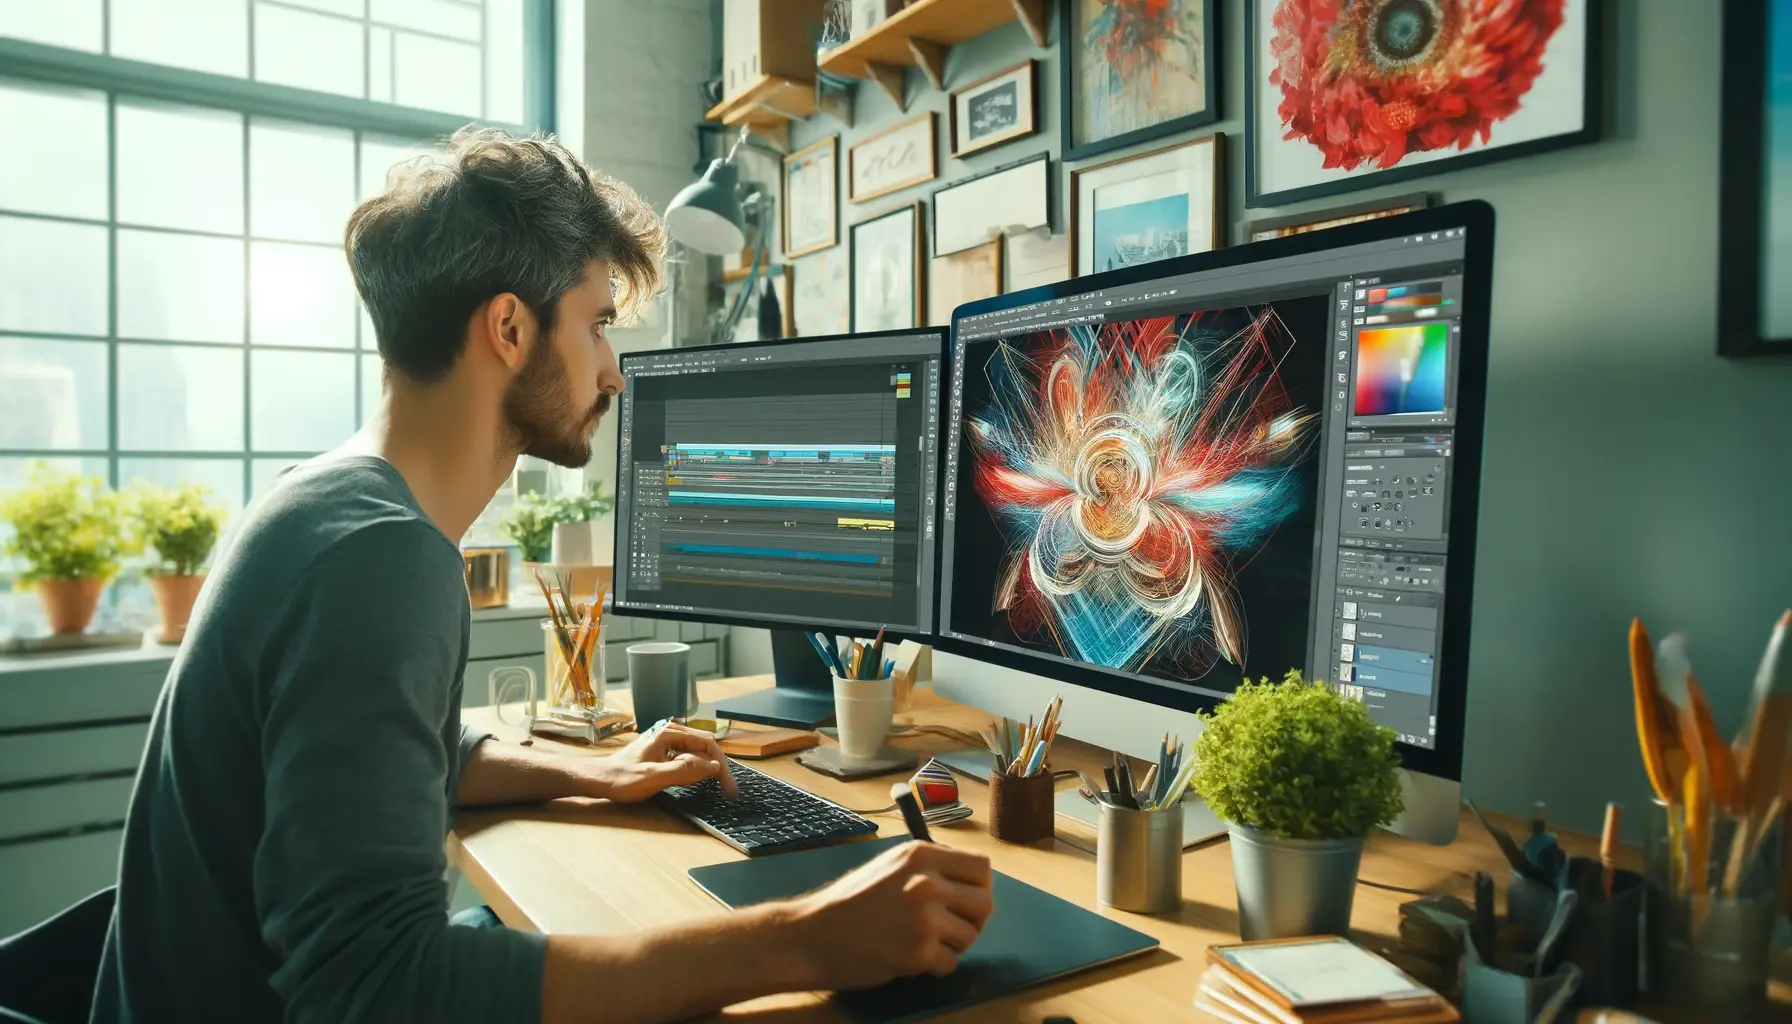 A digital artist integrates the tool in Photoshop with other features, showcasing their skills on dual monitors in a technologically advanced workspace.